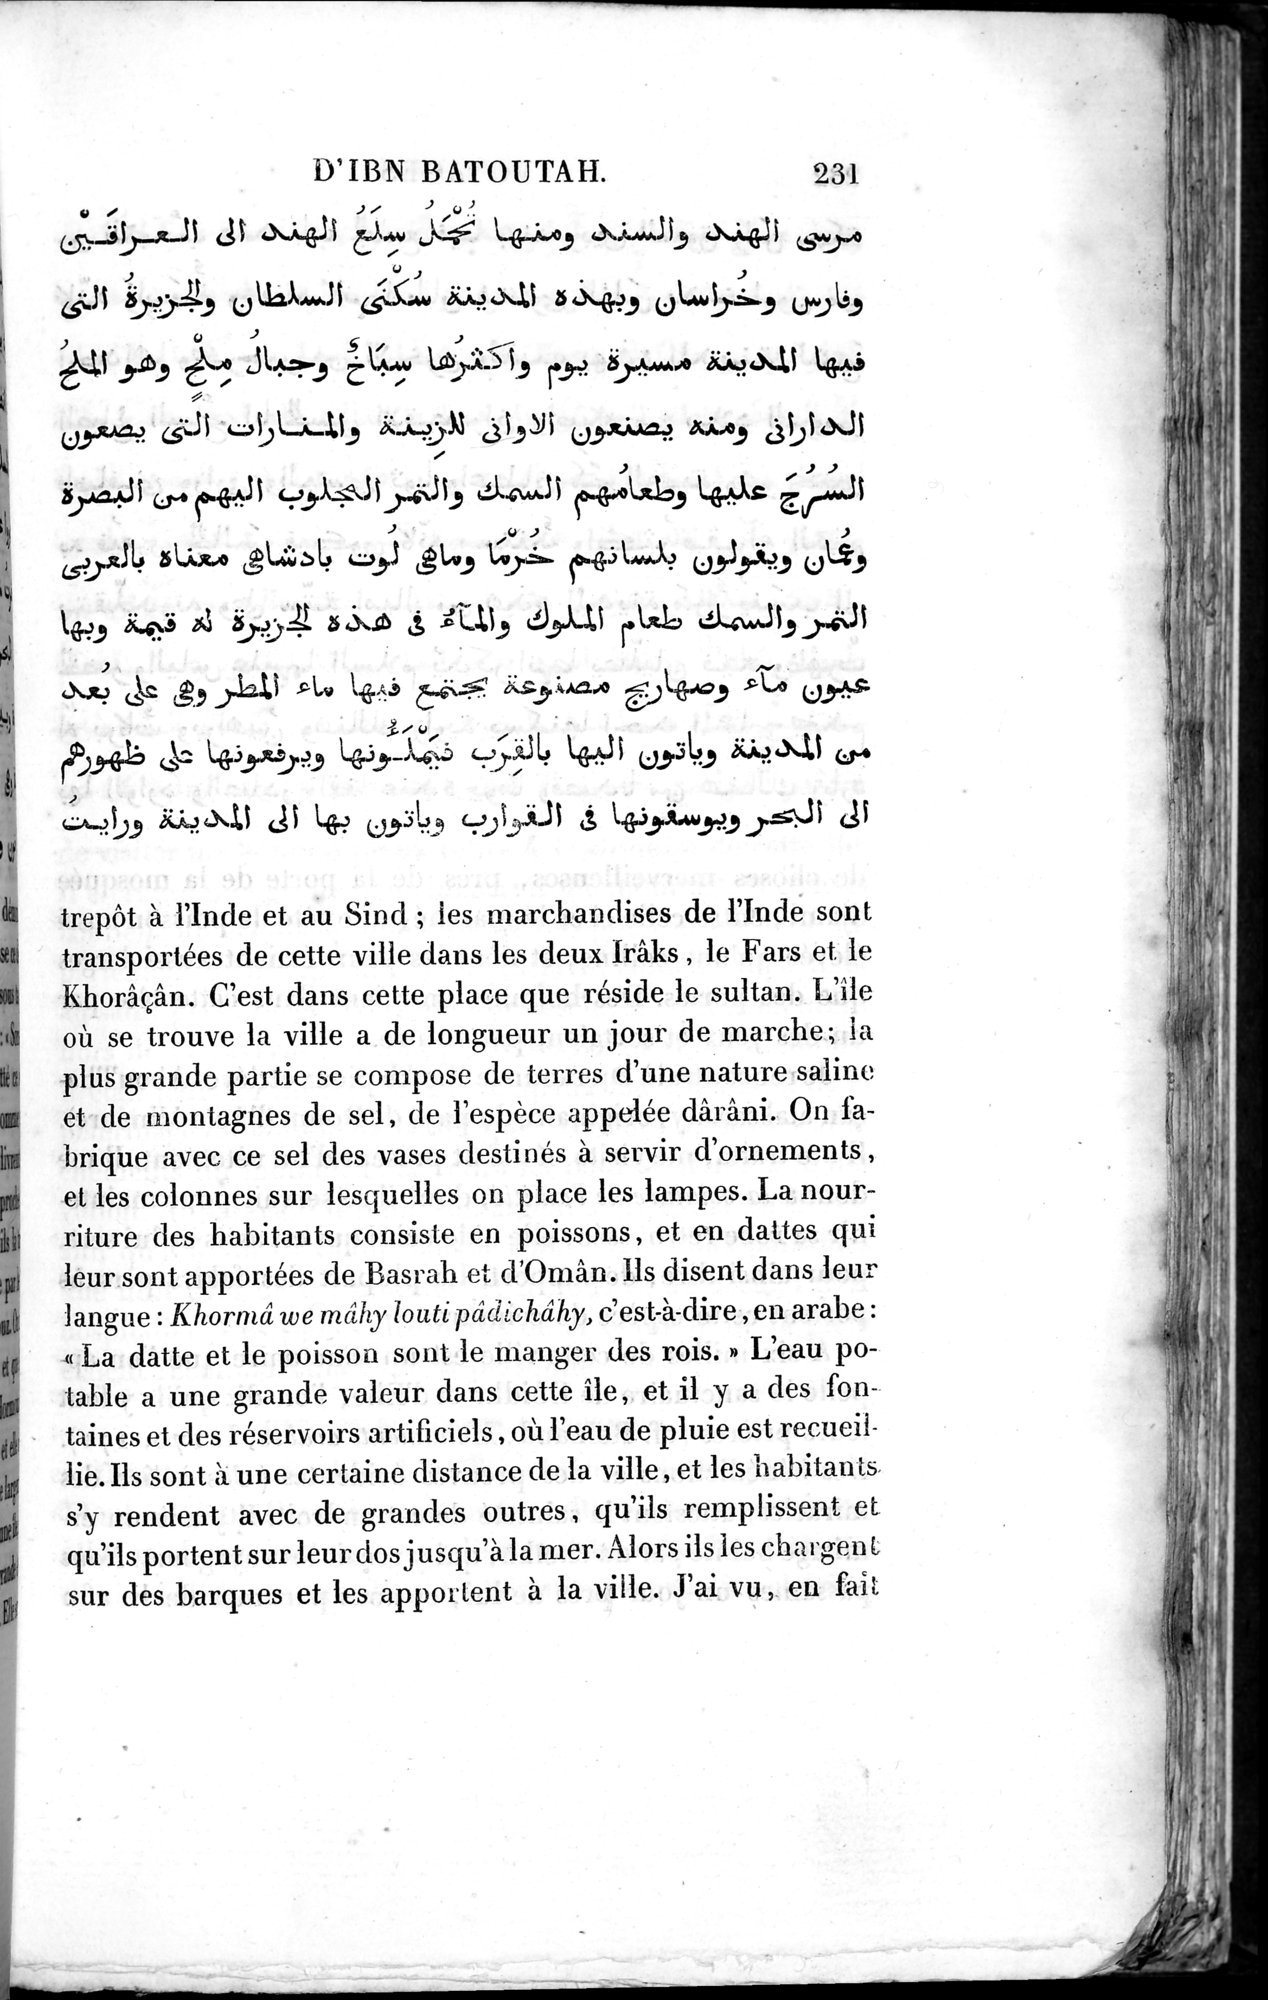 Voyages d'Ibn Batoutah : vol.2 / Page 259 (Grayscale High Resolution Image)